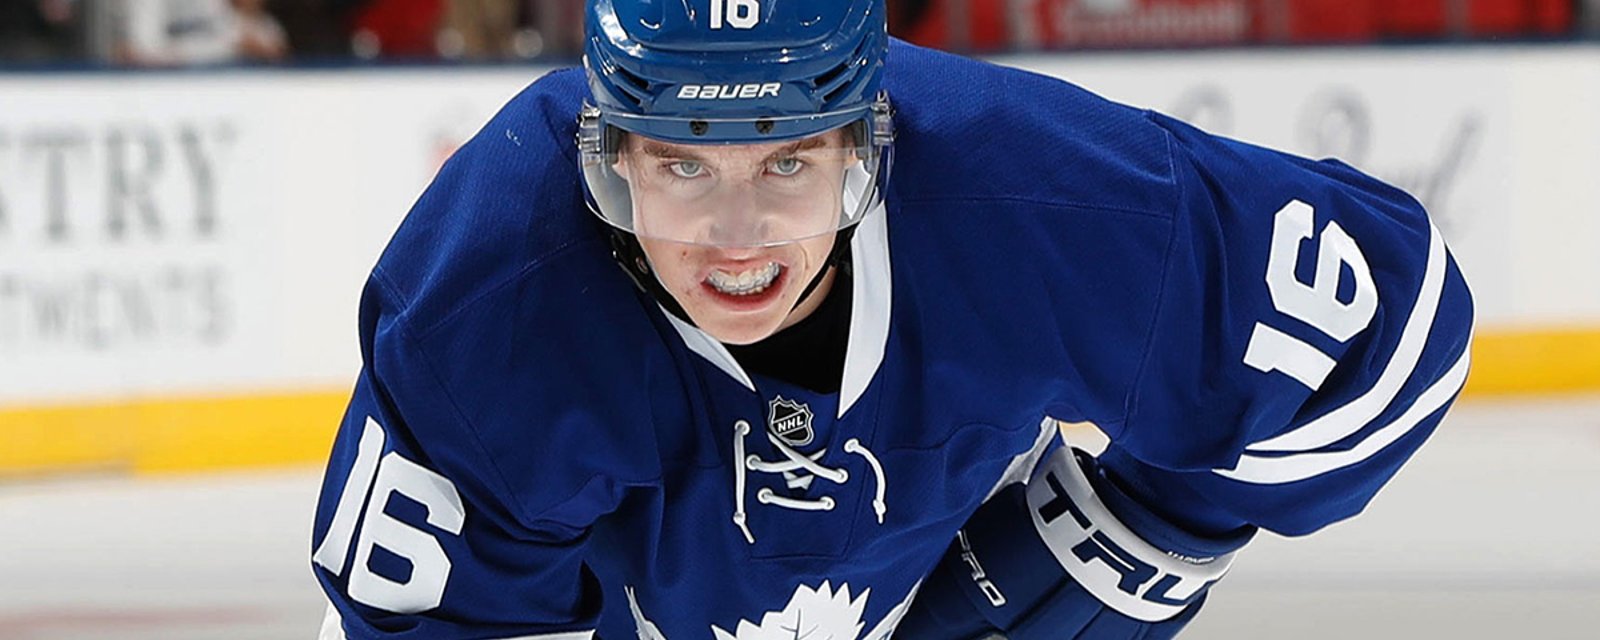 Report: Babcock offers surprising criticism of Marner